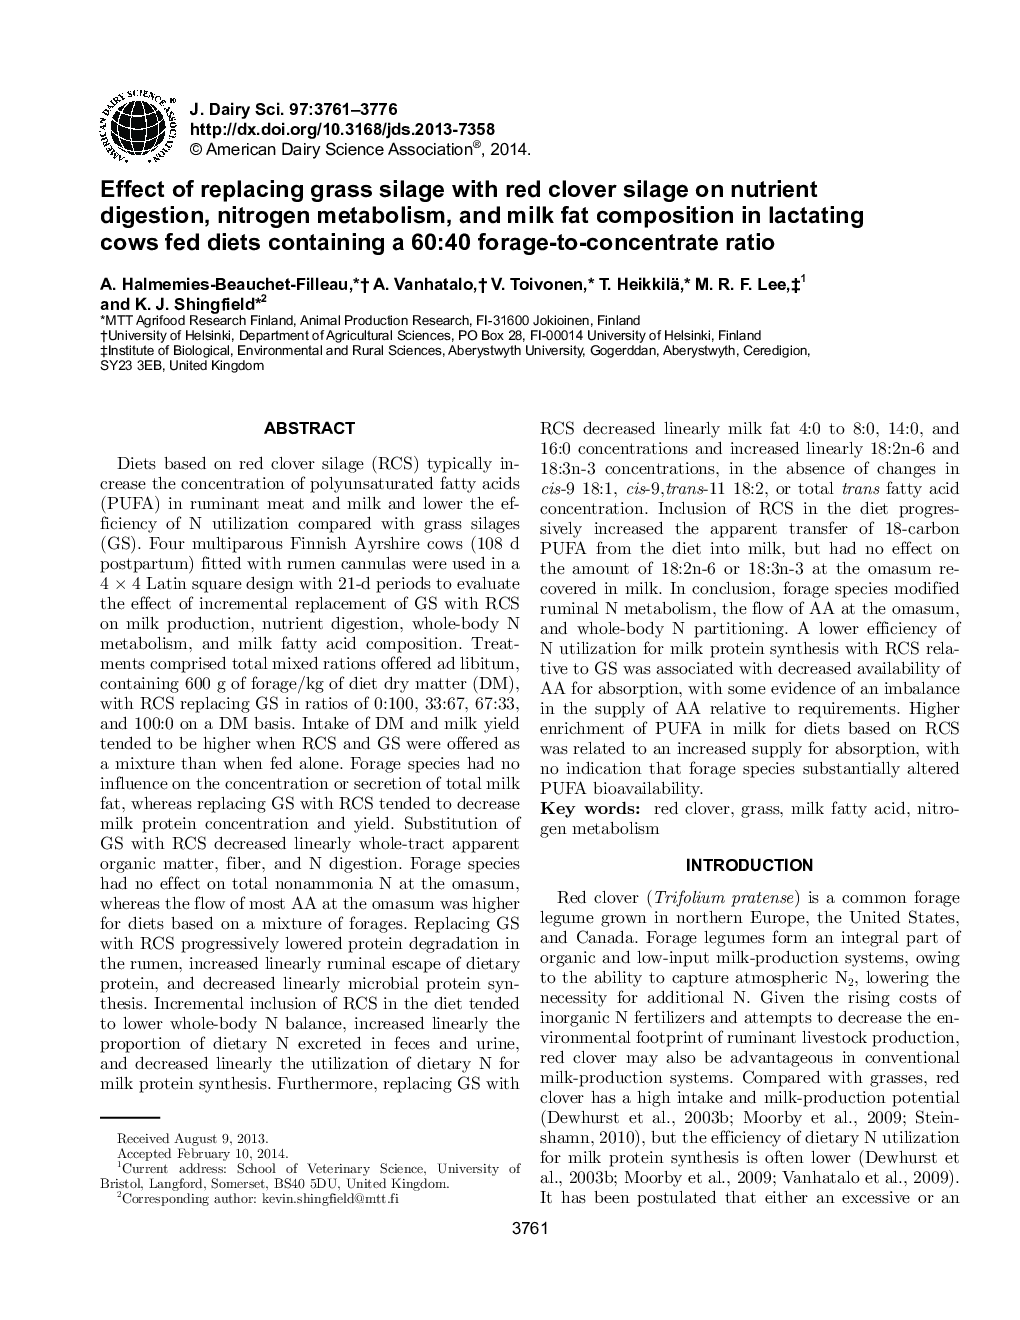 Effect of replacing grass silage with red clover silage on nutrient digestion, nitrogen metabolism, and milk fat composition in lactating cows fed diets containing a 60:40 forage-to-concentrate ratio